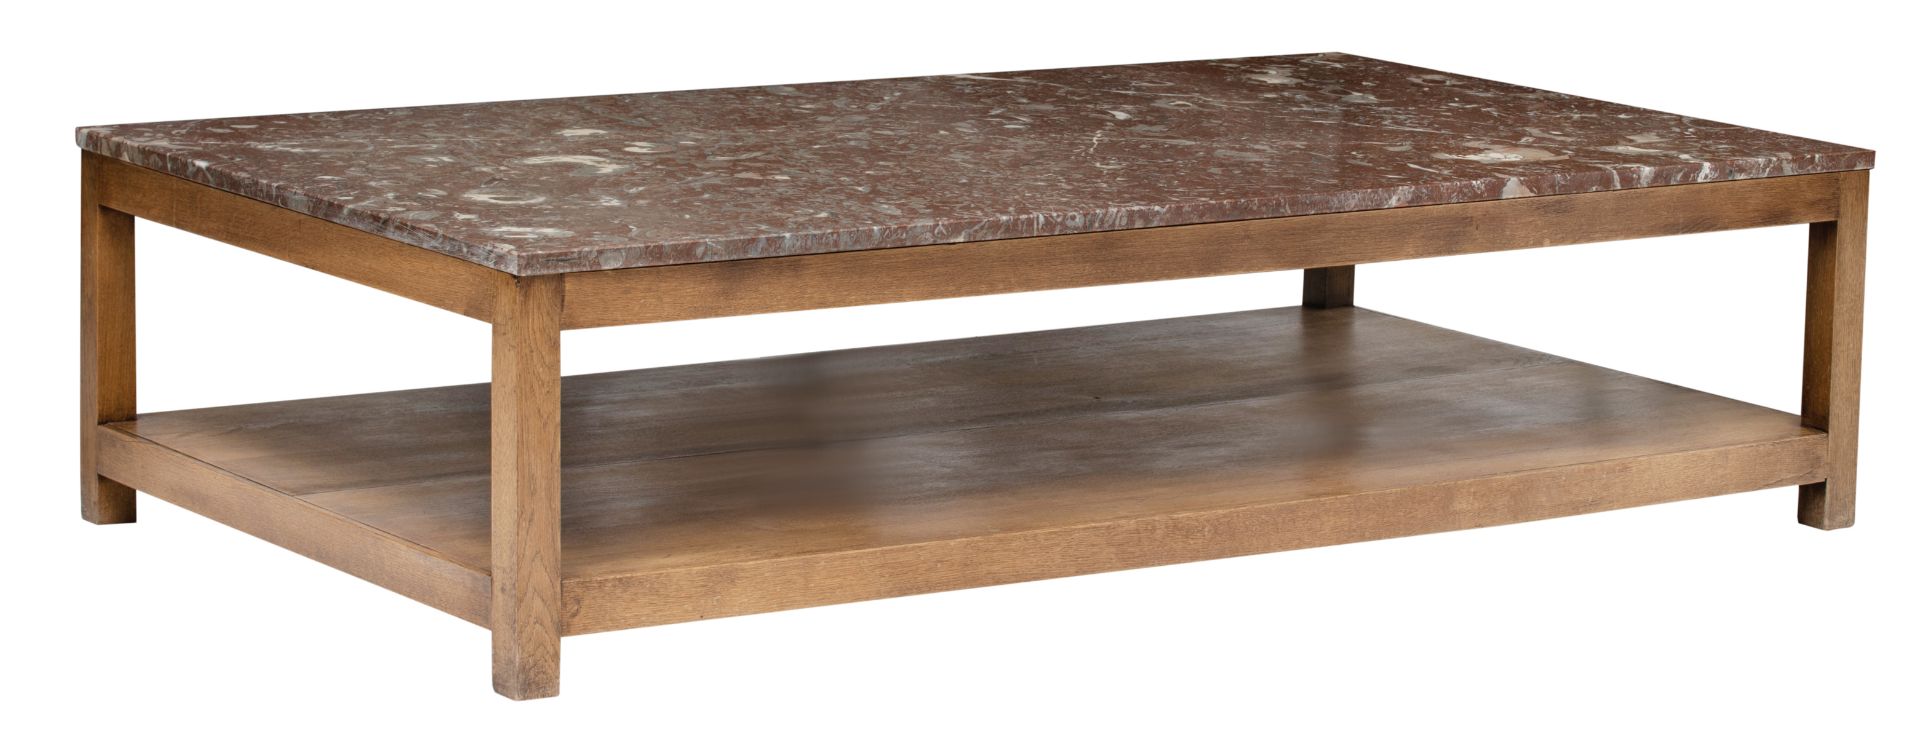 An oak coffee table with a rouge royale marble top, H 41 - W 161 - D 91 cm